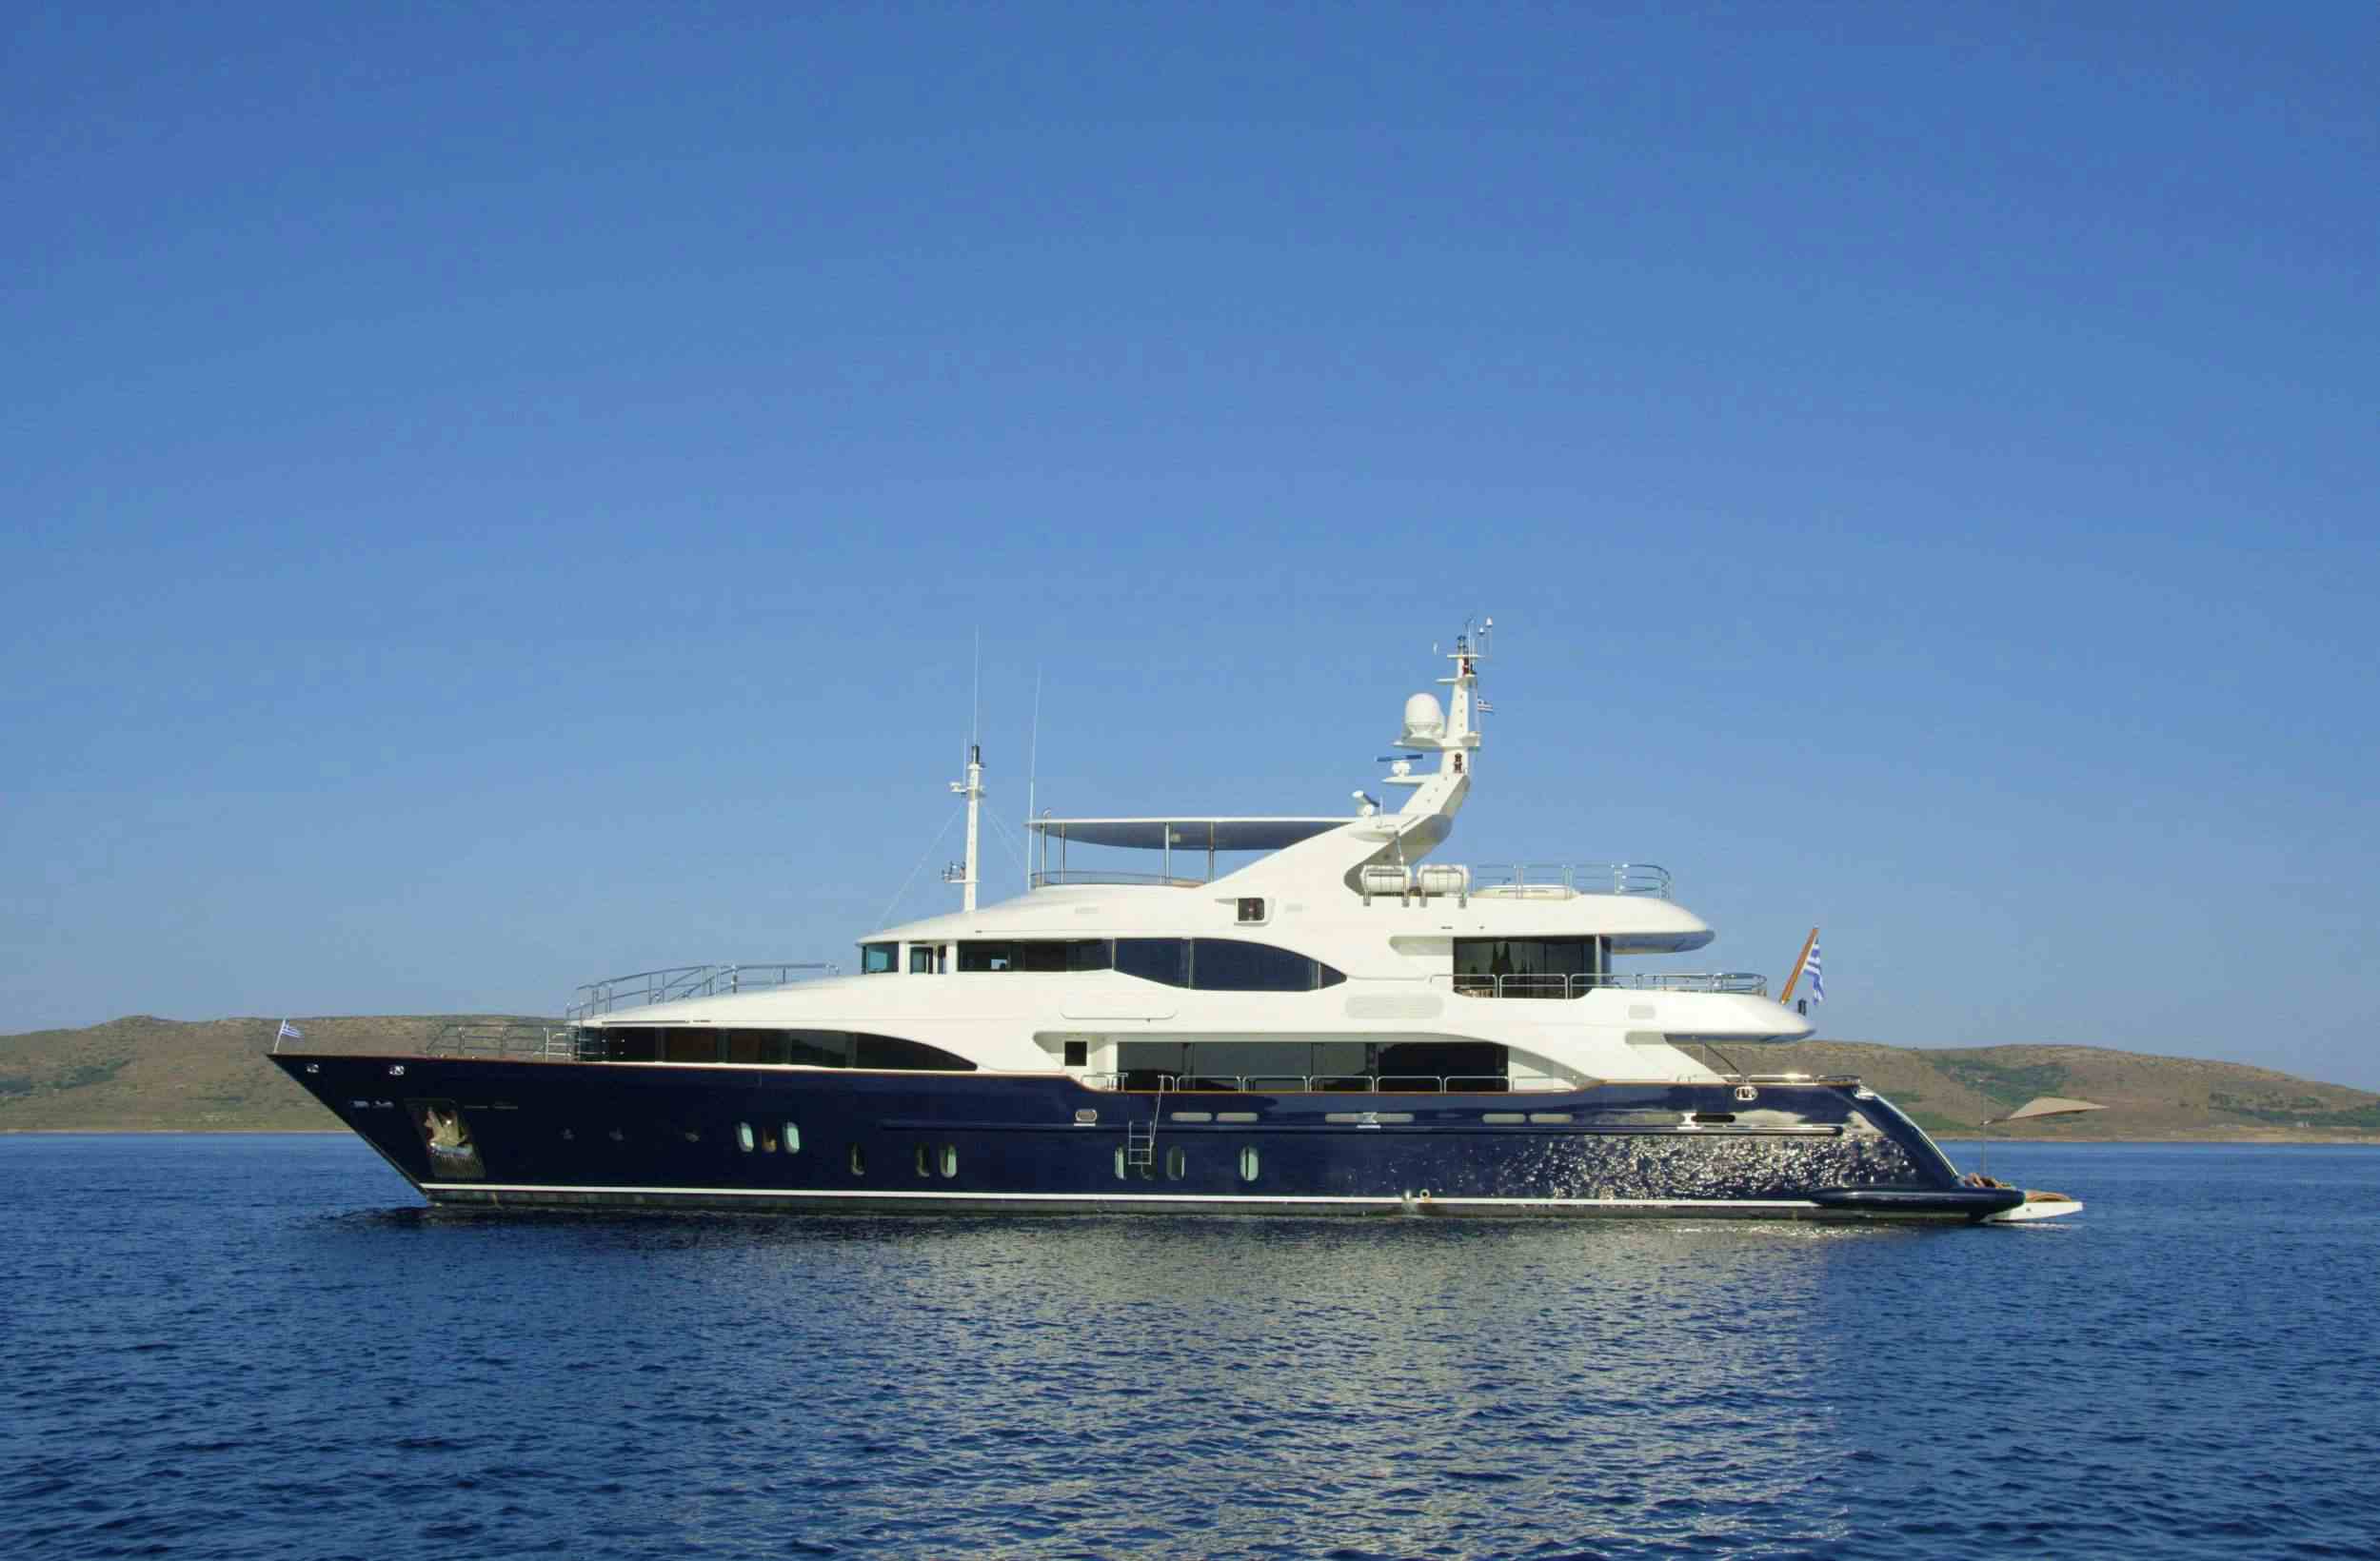 GRANDE AMORE - Yacht Charter Maldives & Boat hire in Summer: W. Med -Naples/Sicily, Greece, W. Med -Riviera/Cors/Sard., Turkey, W. Med - Spain/Balearics, Croatia | Winter: Indian Ocean and SE Asia, Red Sea, United Arab Emirates 1